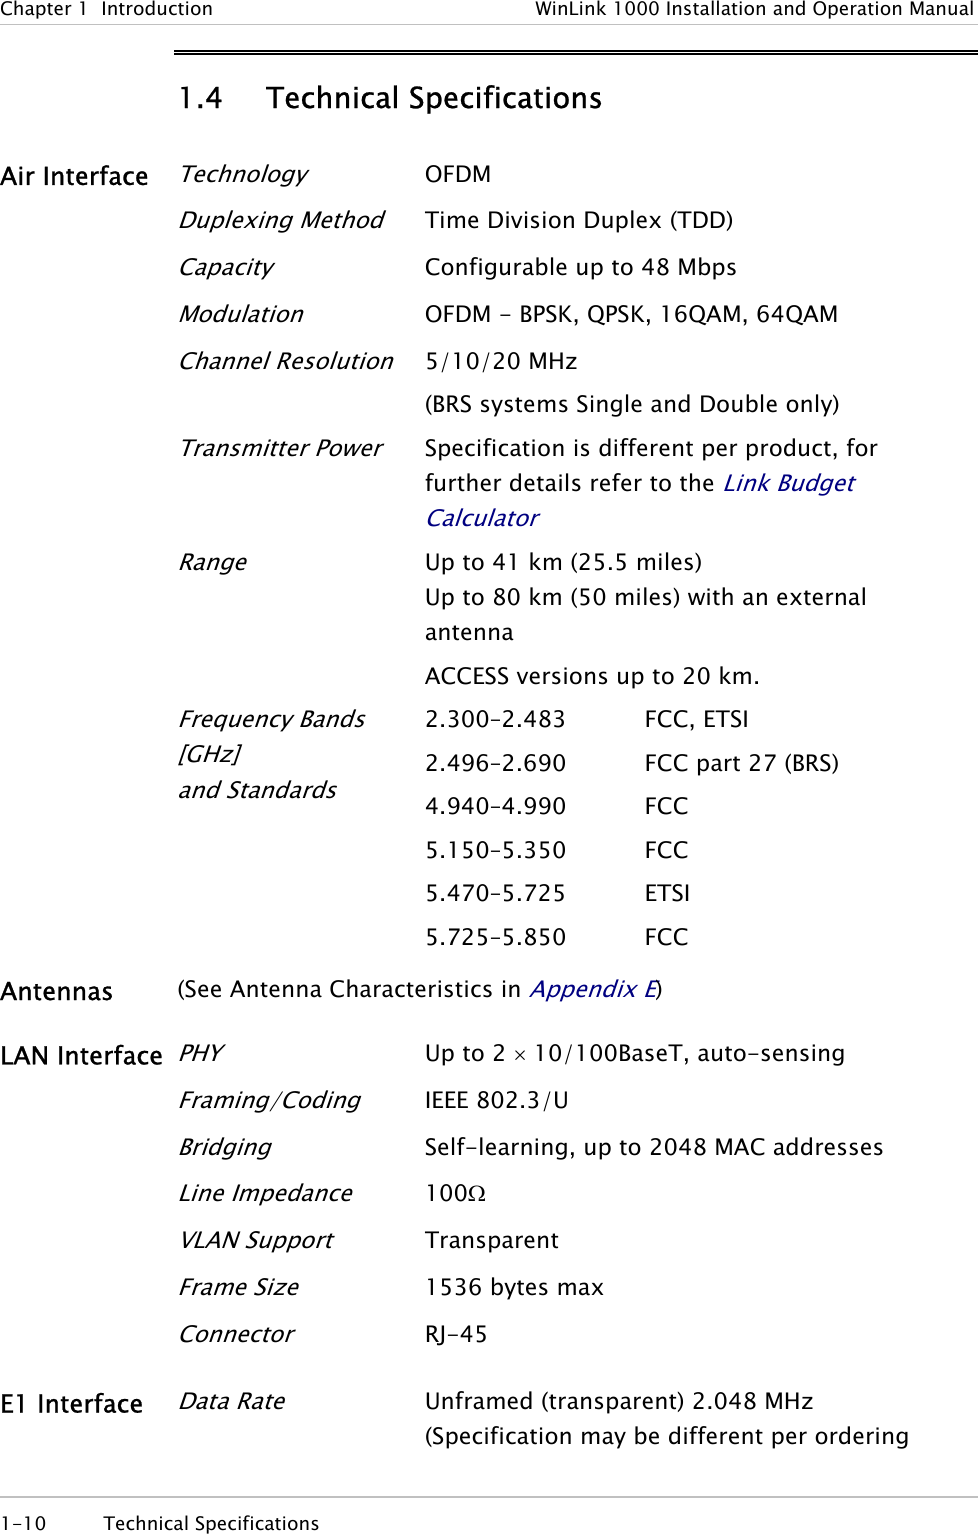 Chapter 1  Introduction  WinLink 1000 Installation and Operation Manual 1.4   Technical Specifications Air Interface Technology OFDM  Duplexing Method Time Division Duplex (TDD)  Capacity Configurable up to 48 Mbps   Modulation OFDM - BPSK, QPSK, 16QAM, 64QAM  Channel Resolution 5/10/20 MHz (BRS systems Single and Double only)  Transmitter Power Specification is different per product, for further details refer to the Link Budget Calculator Range Up to 41 km (25.5 miles)  Up to 80 km (50 miles) with an external antenna ACCESS versions up to 20 km.  Frequency Bands [GHz] and Standards 2.300–2.483 2.496–2.690 4.940–4.990 5.150–5.350 5.470–5.725 5.725–5.850 FCC, ETSI FCC part 27 (BRS) FCC FCC ETSI FCC Antennas  (See Antenna Characteristics in Appendix E) LAN Interface PHY Up to 2 × 10/100BaseT, auto-sensing  Framing/Coding IEEE 802.3/U  Bridging Self-learning, up to 2048 MAC addresses  Line Impedance 100Ω  VLAN Support Transparent  Frame Size 1536 bytes max  Connector RJ-45 E1 Interface Data Rate Unframed (transparent) 2.048 MHz (Specification may be different per ordering 1-10 Technical Specifications  